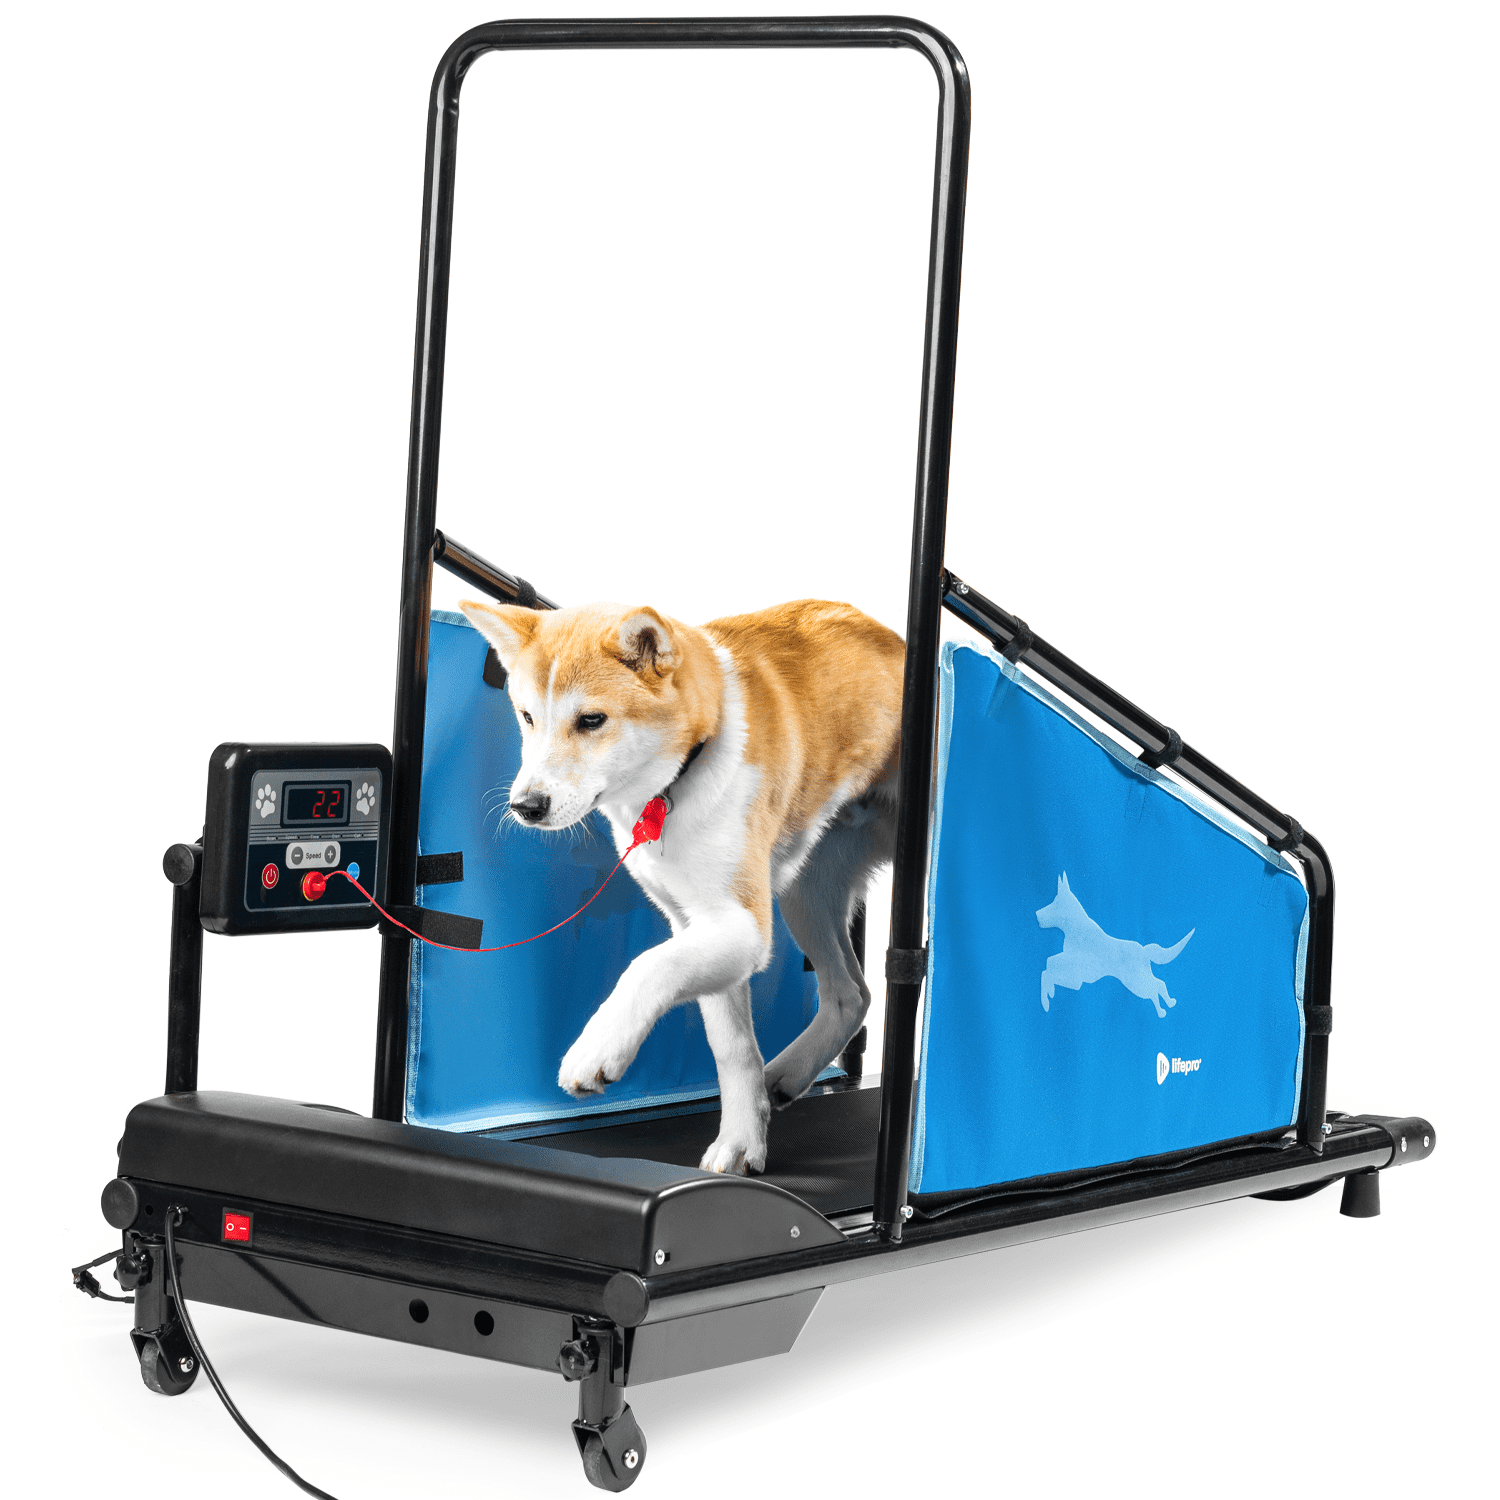 Folding Pet Treadmill Machine Home Dogs Pet Exercise Equipment Remote 